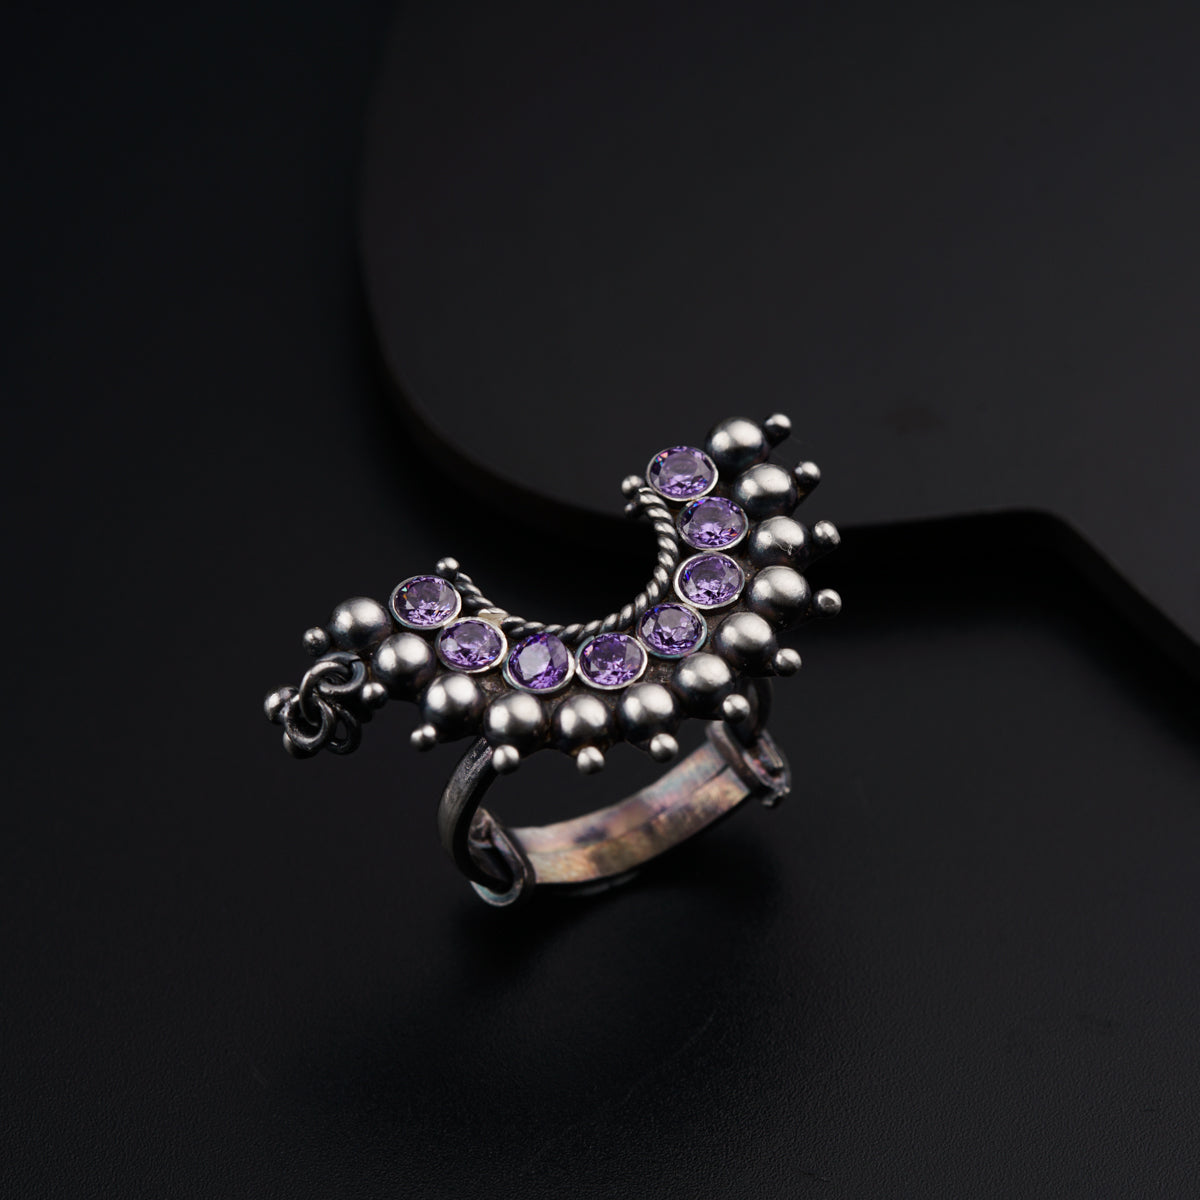 a silver ring with purple stones on it